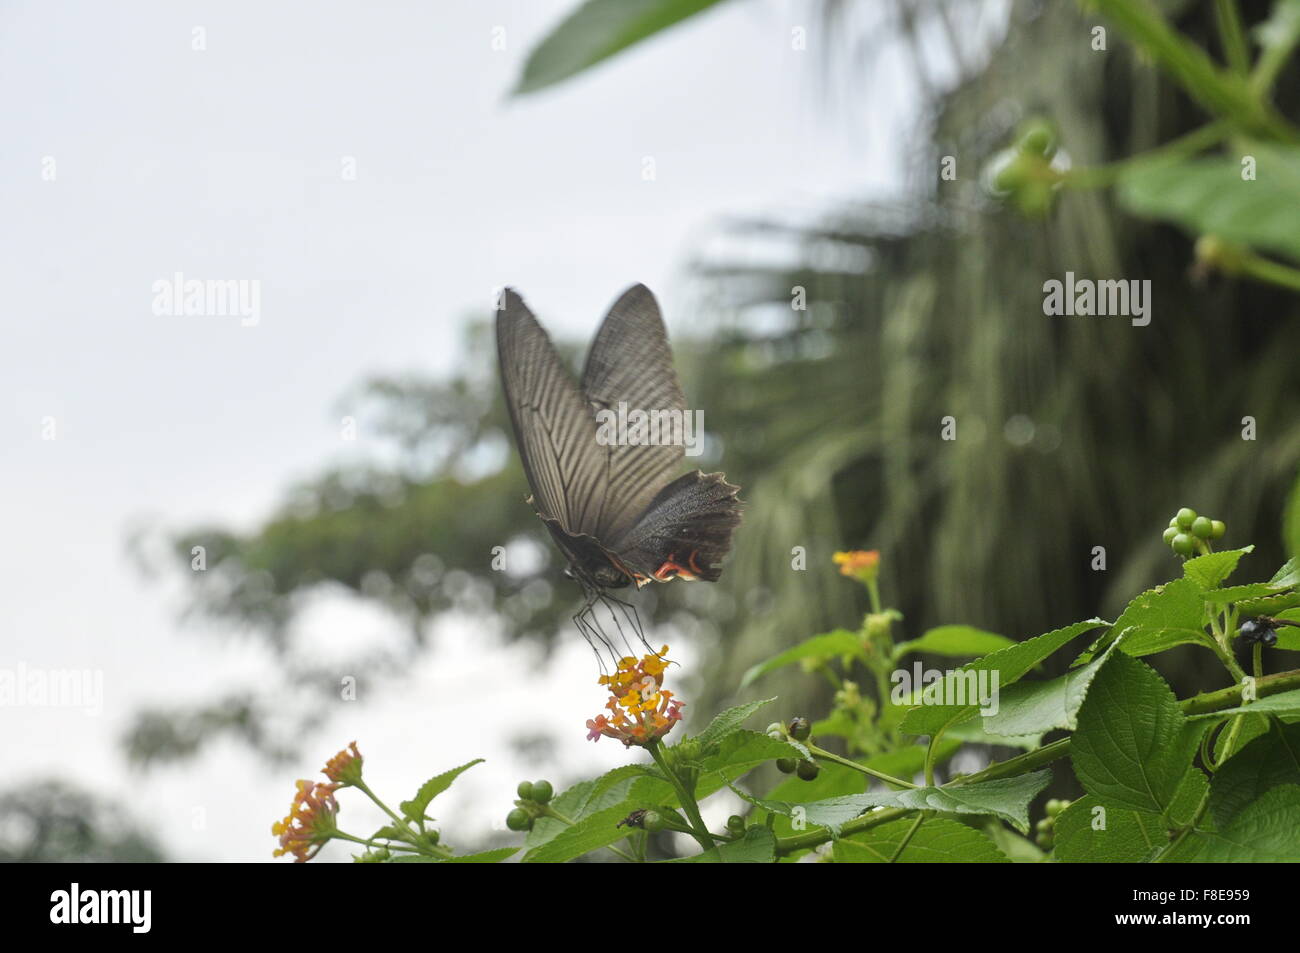 Scarlet Swallowtail butterfly, Flores, Indonesia, Asia Stock Photo